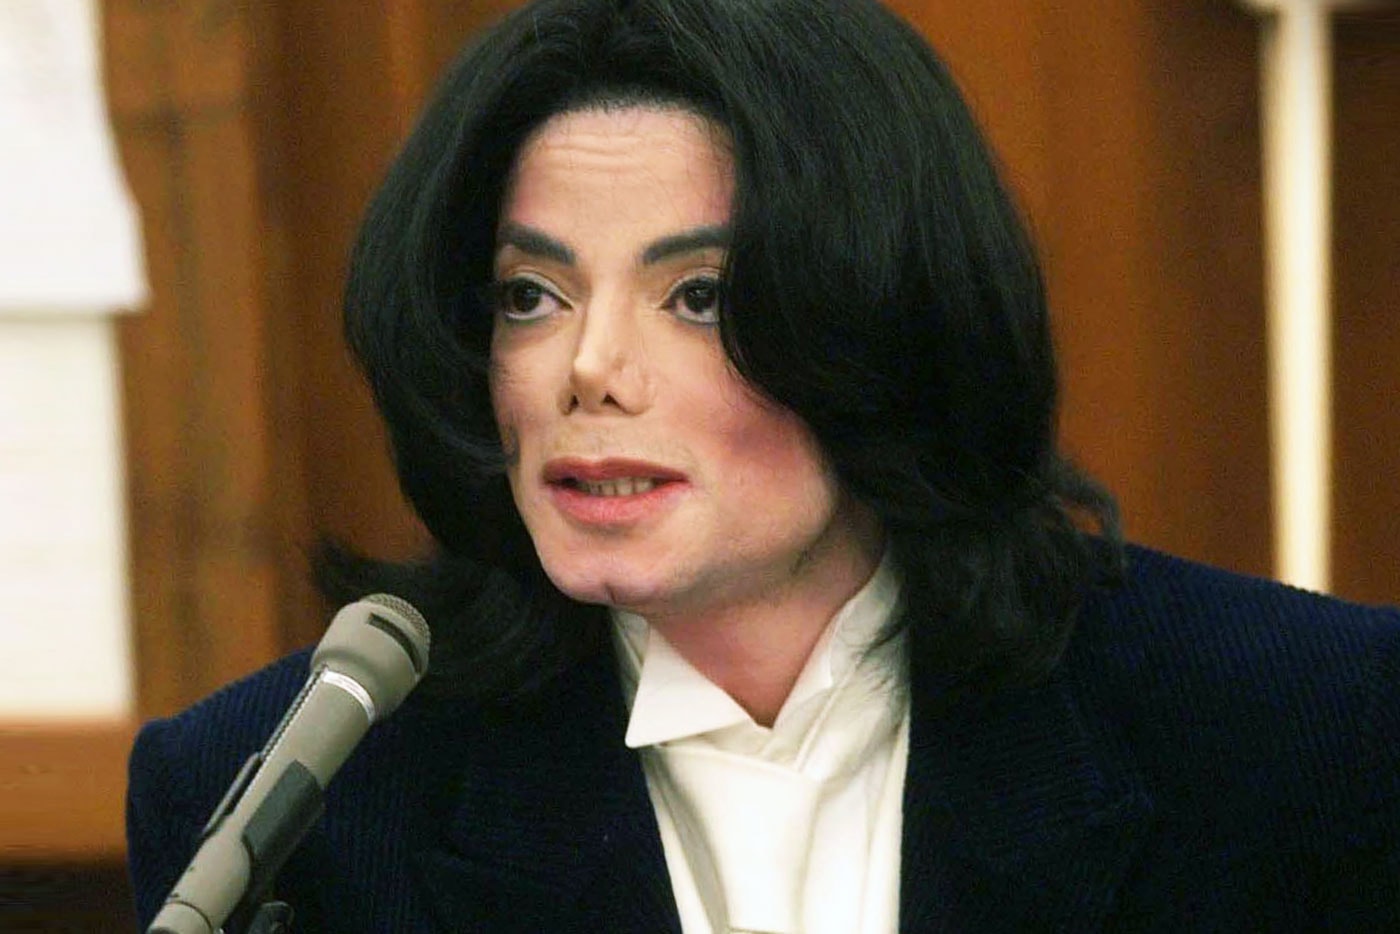 Michael Jackson's Last Days to Be Adapted for TV Series